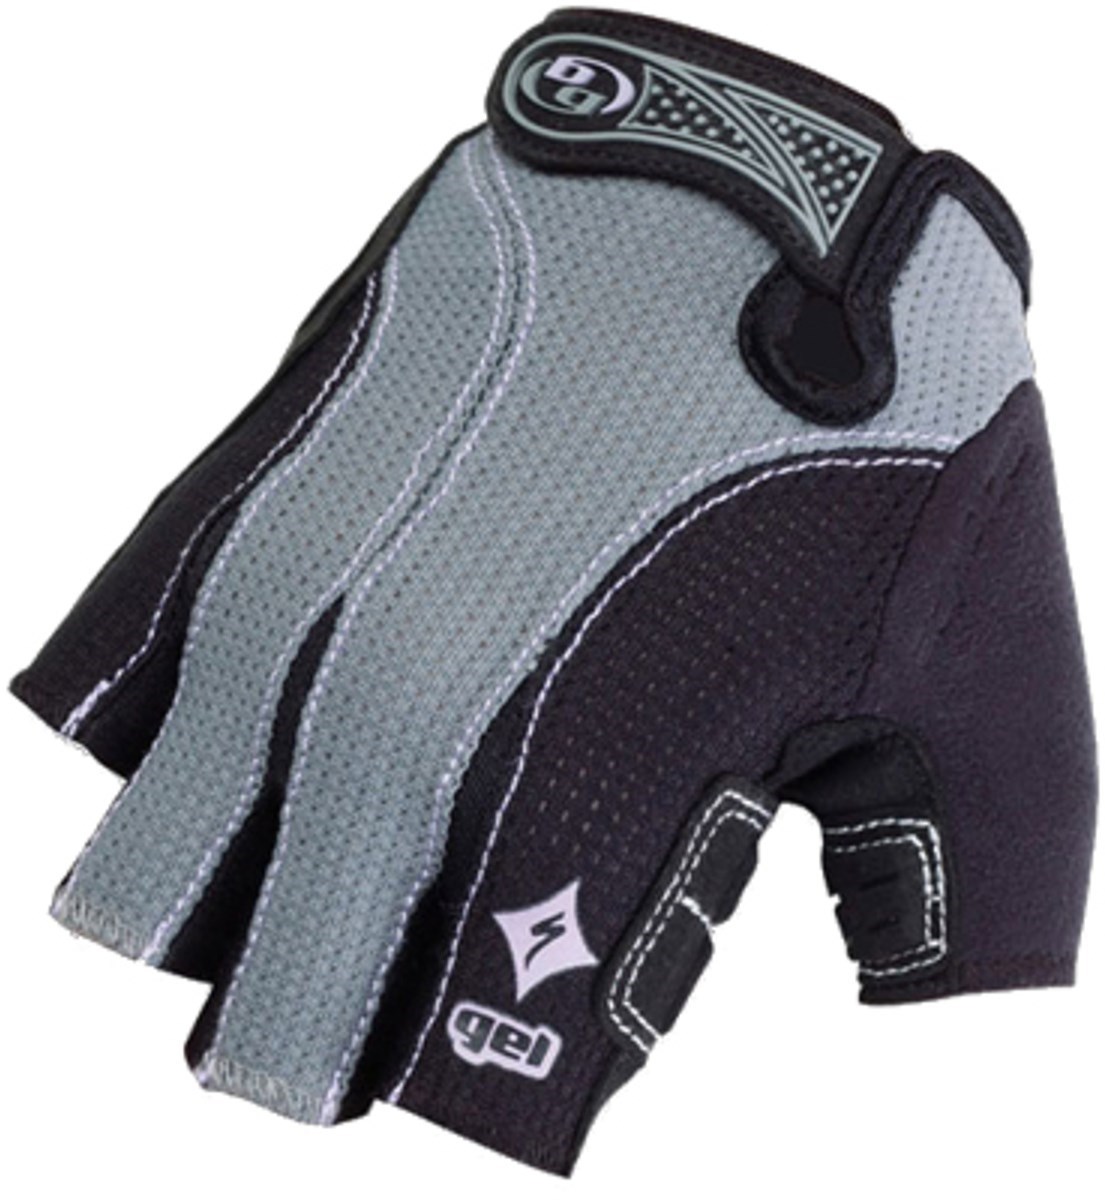 Specialized BG Gel D4W Womens Mitts product image